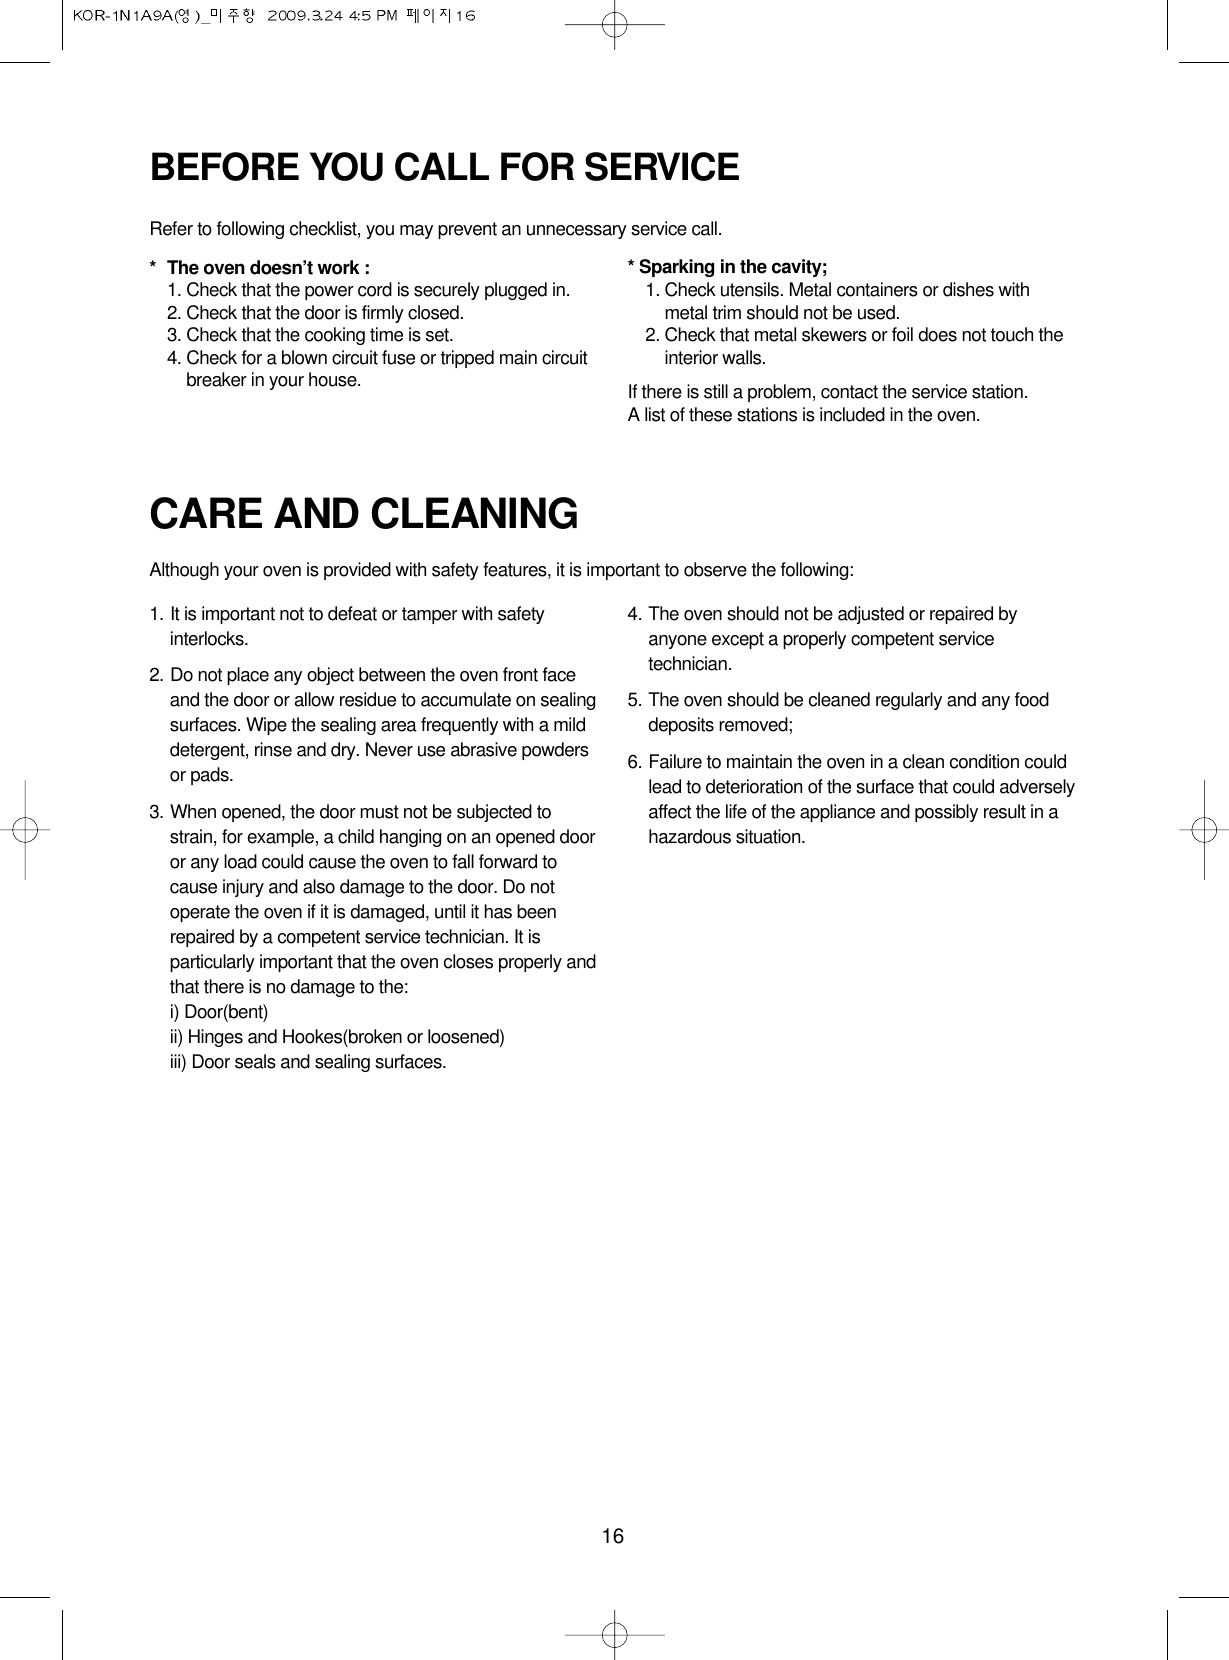 16CARE AND CLEANINGAlthough your oven is provided with safety features, it is important to observe the following:1. It is important not to defeat or tamper with safetyinterlocks.2. Do not place any object between the oven front faceand the door or allow residue to accumulate on sealingsurfaces. Wipe the sealing area frequently with a milddetergent, rinse and dry. Never use abrasive powdersor pads.3. When opened, the door must not be subjected tostrain, for example, a child hanging on an opened dooror any load could cause the oven to fall forward tocause injury and also damage to the door. Do notoperate the oven if it is damaged, until it has beenrepaired by a competent service technician. It isparticularly important that the oven closes properly andthat there is no damage to the:i) Door(bent)ii) Hinges and Hookes(broken or loosened)iii) Door seals and sealing surfaces.4. The oven should not be adjusted or repaired byanyone except a properly competent servicetechnician.5. The oven should be cleaned regularly and any fooddeposits removed;6. Failure to maintain the oven in a clean condition couldlead to deterioration of the surface that could adverselyaffect the life of the appliance and possibly result in ahazardous situation.BEFORE YOU CALL FOR SERVICERefer to following checklist, you may prevent an unnecessary service call.*The oven doesn’t work :1. Check that the power cord is securely plugged in.2. Check that the door is firmly closed.3. Check that the cooking time is set.4. Check for a blown circuit fuse or tripped main circuitbreaker in your house.* Sparking in the cavity;1. Check utensils. Metal containers or dishes withmetal trim should not be used.2. Check that metal skewers or foil does not touch theinterior walls.If there is still a problem, contact the service station.A list of these stations is included in the oven.